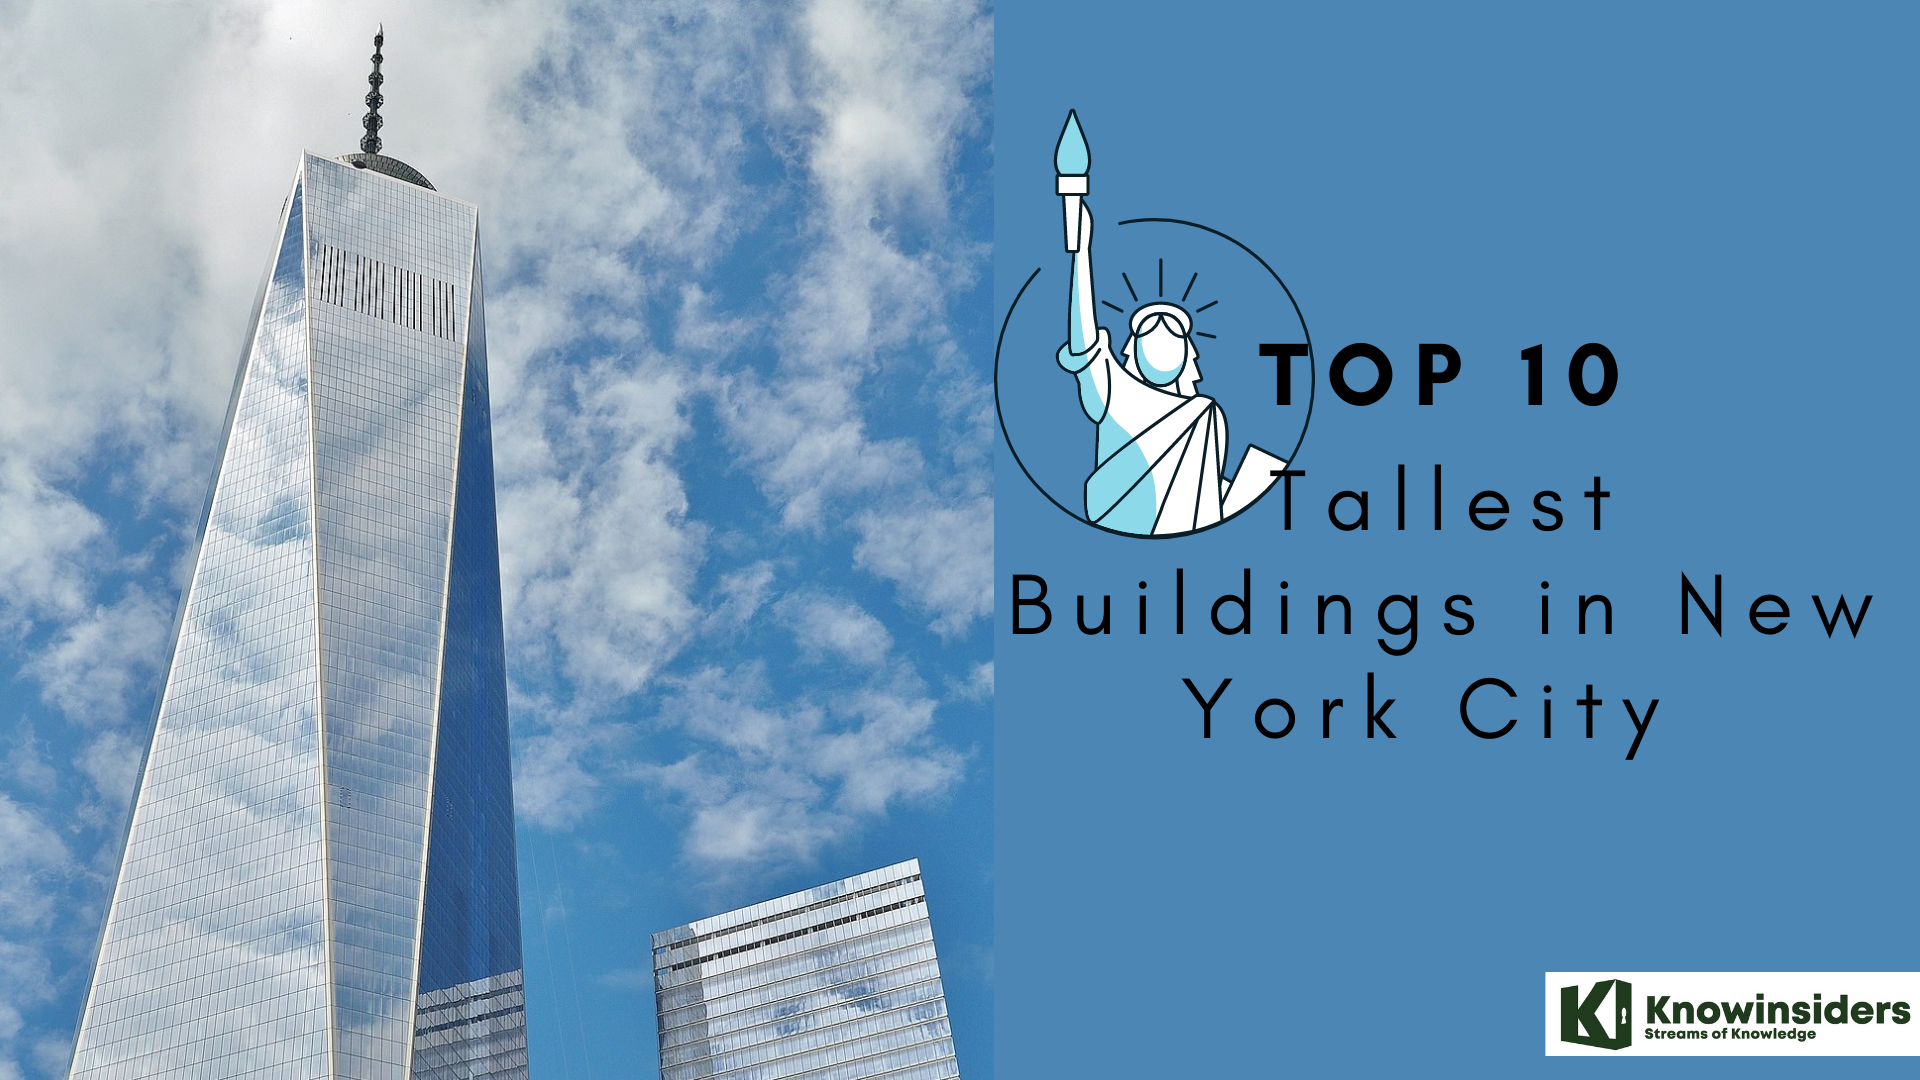 Top 10 tallest buildings in New York City 